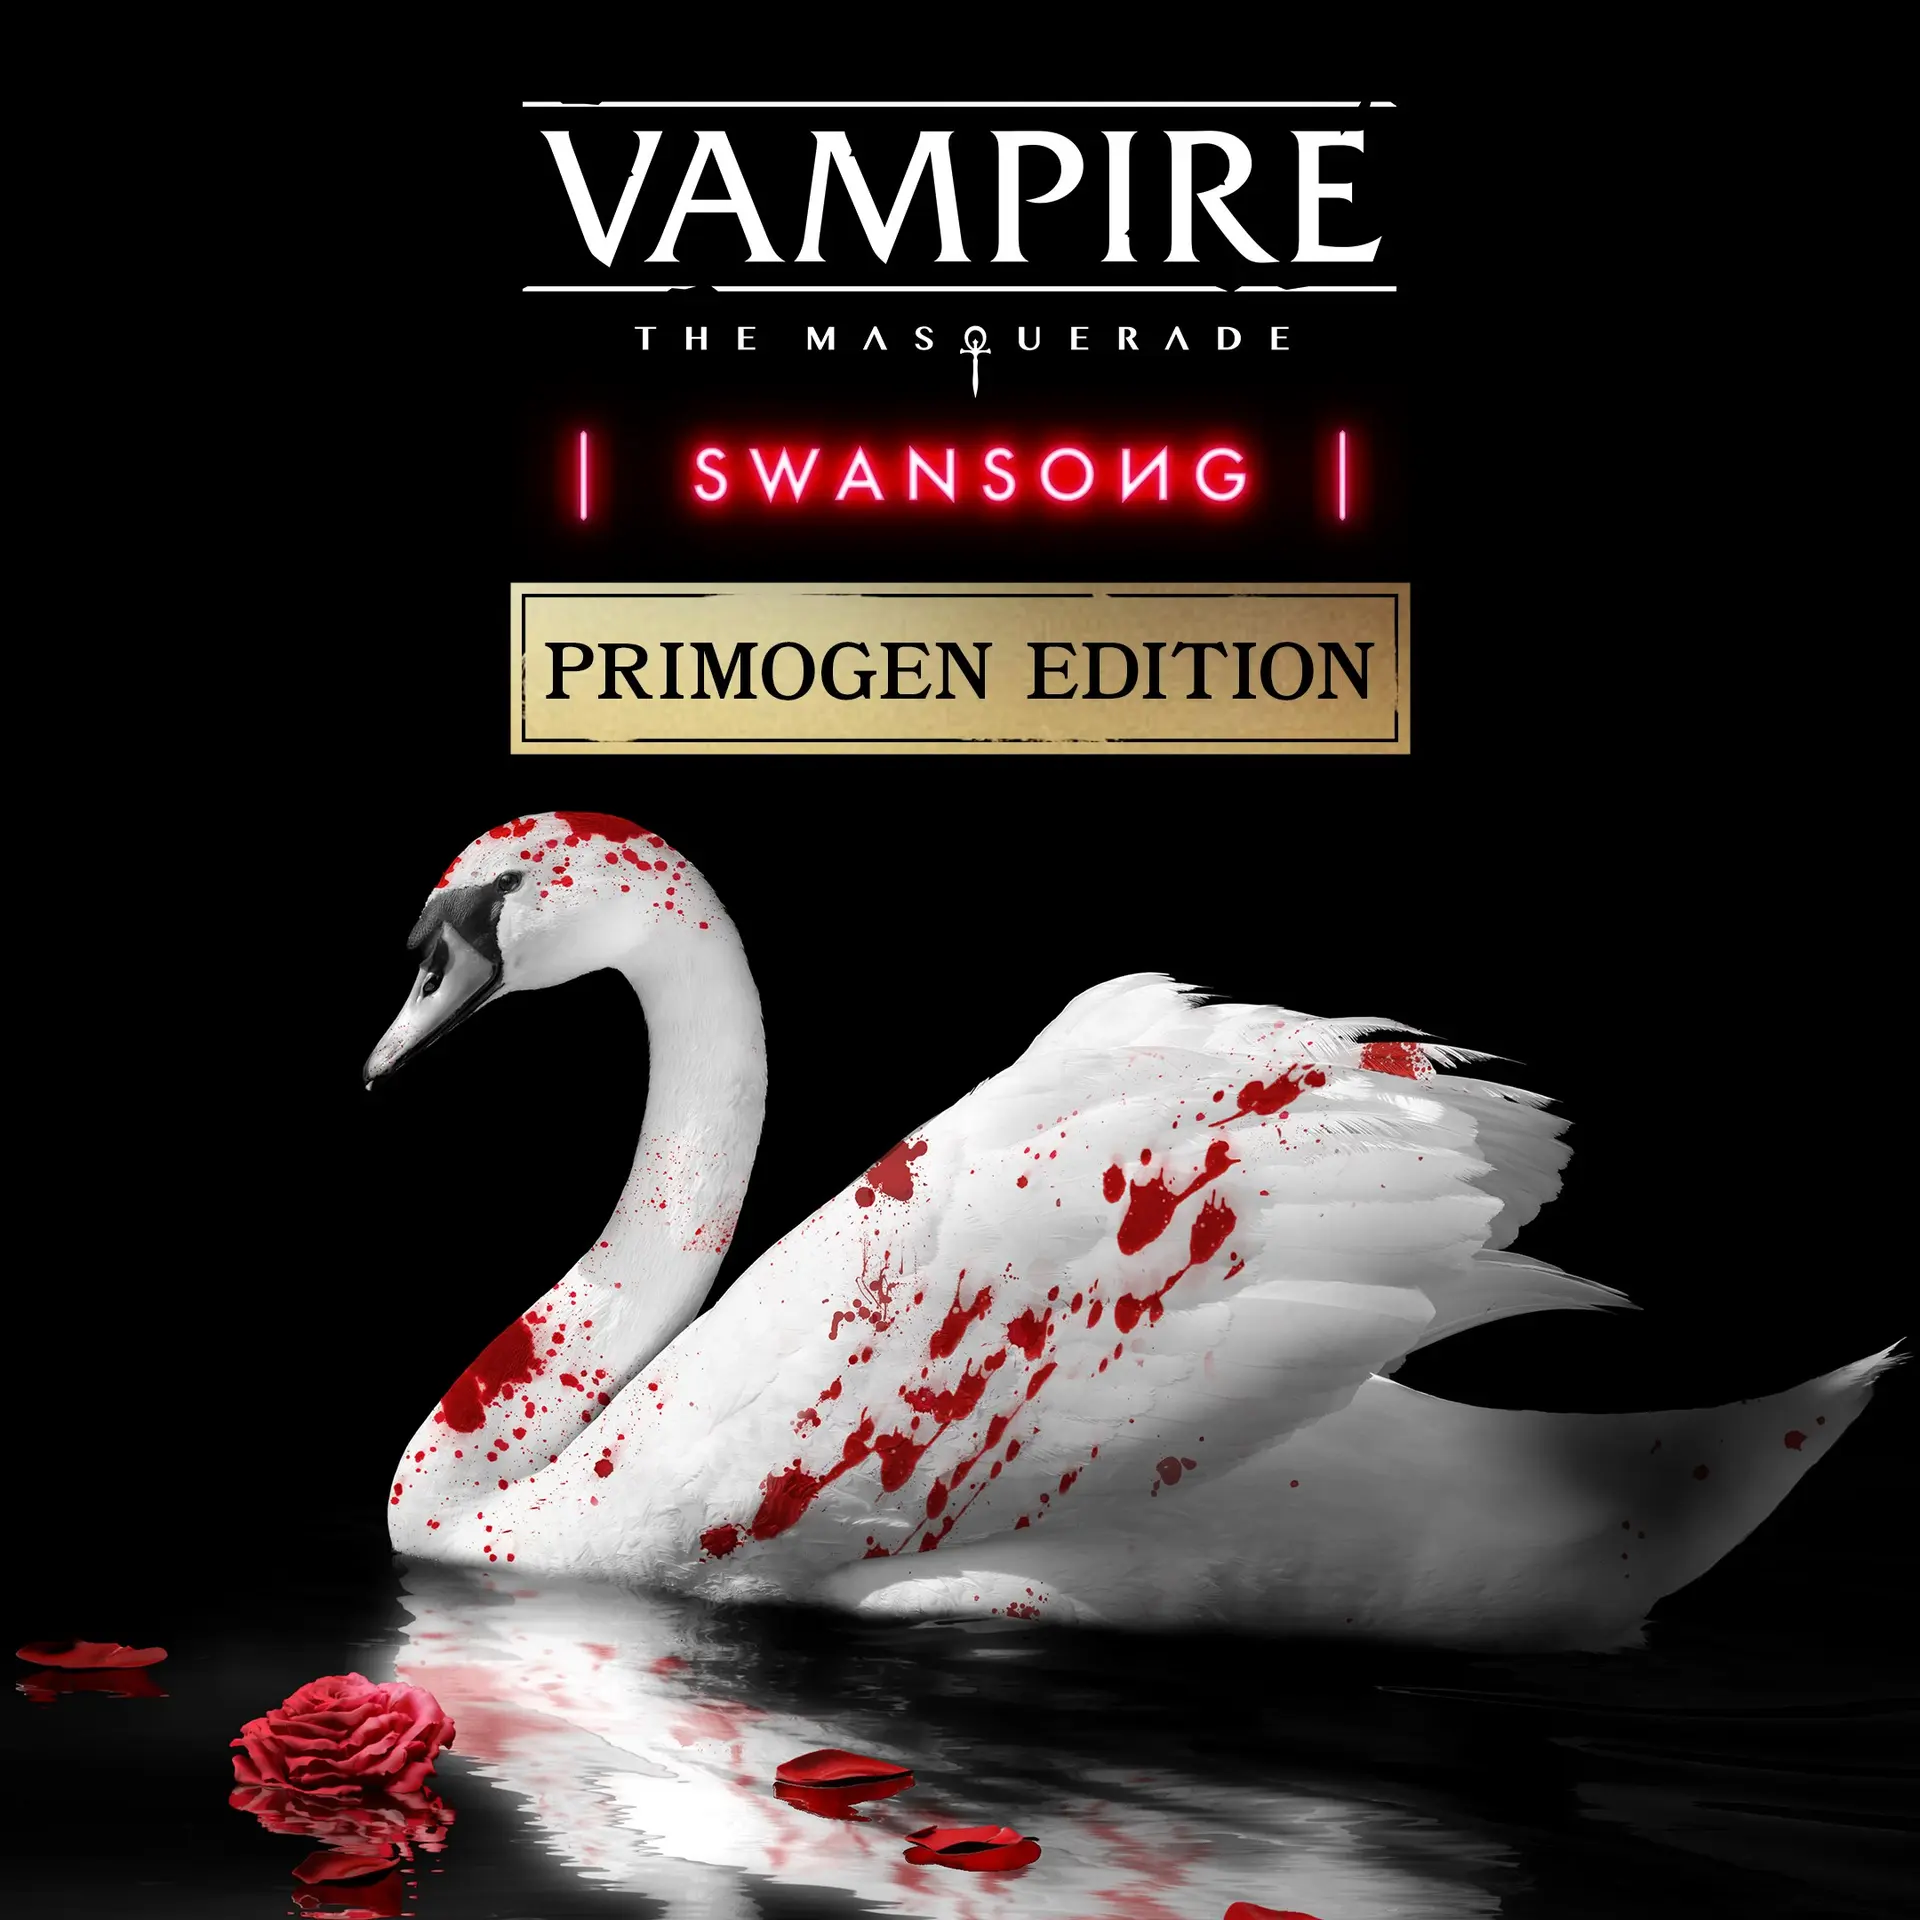 Vampire: The Masquerade - Swansong PRIMOGEN EDITION Pre Order (XBOX One - Cheapest Store)